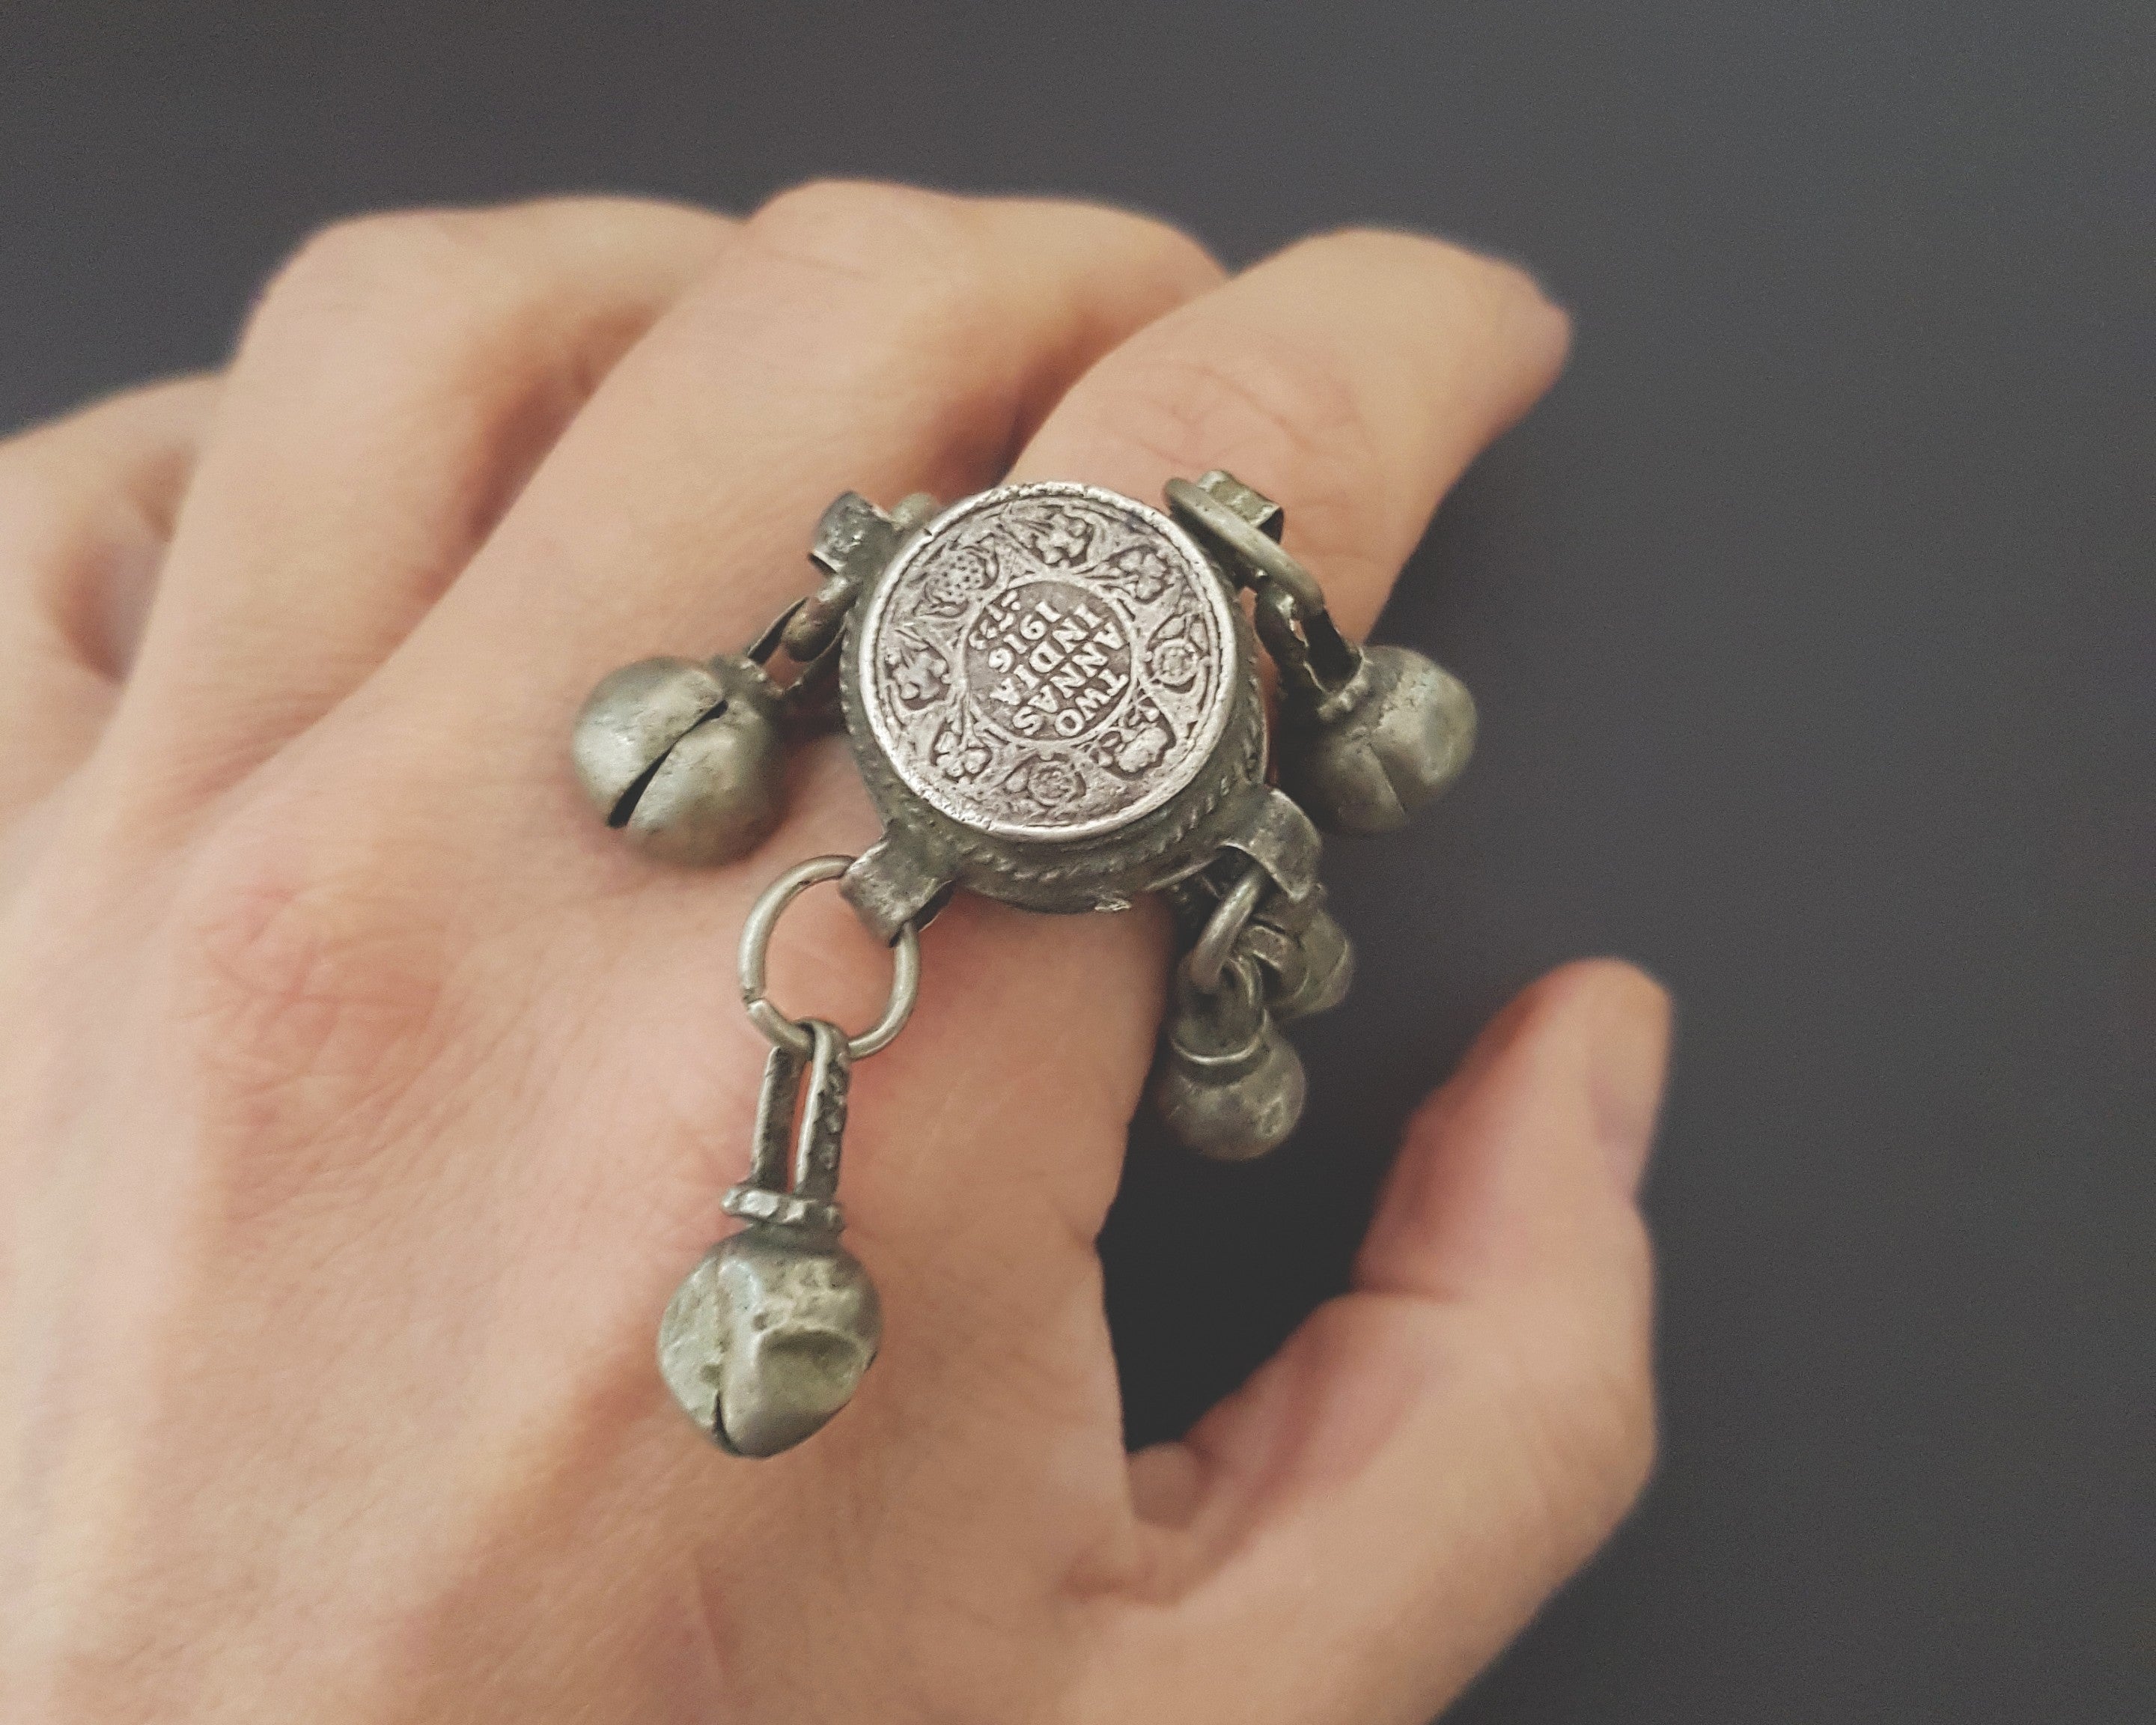 Old Yemeni Bedouin Ring with Bells - Size 8